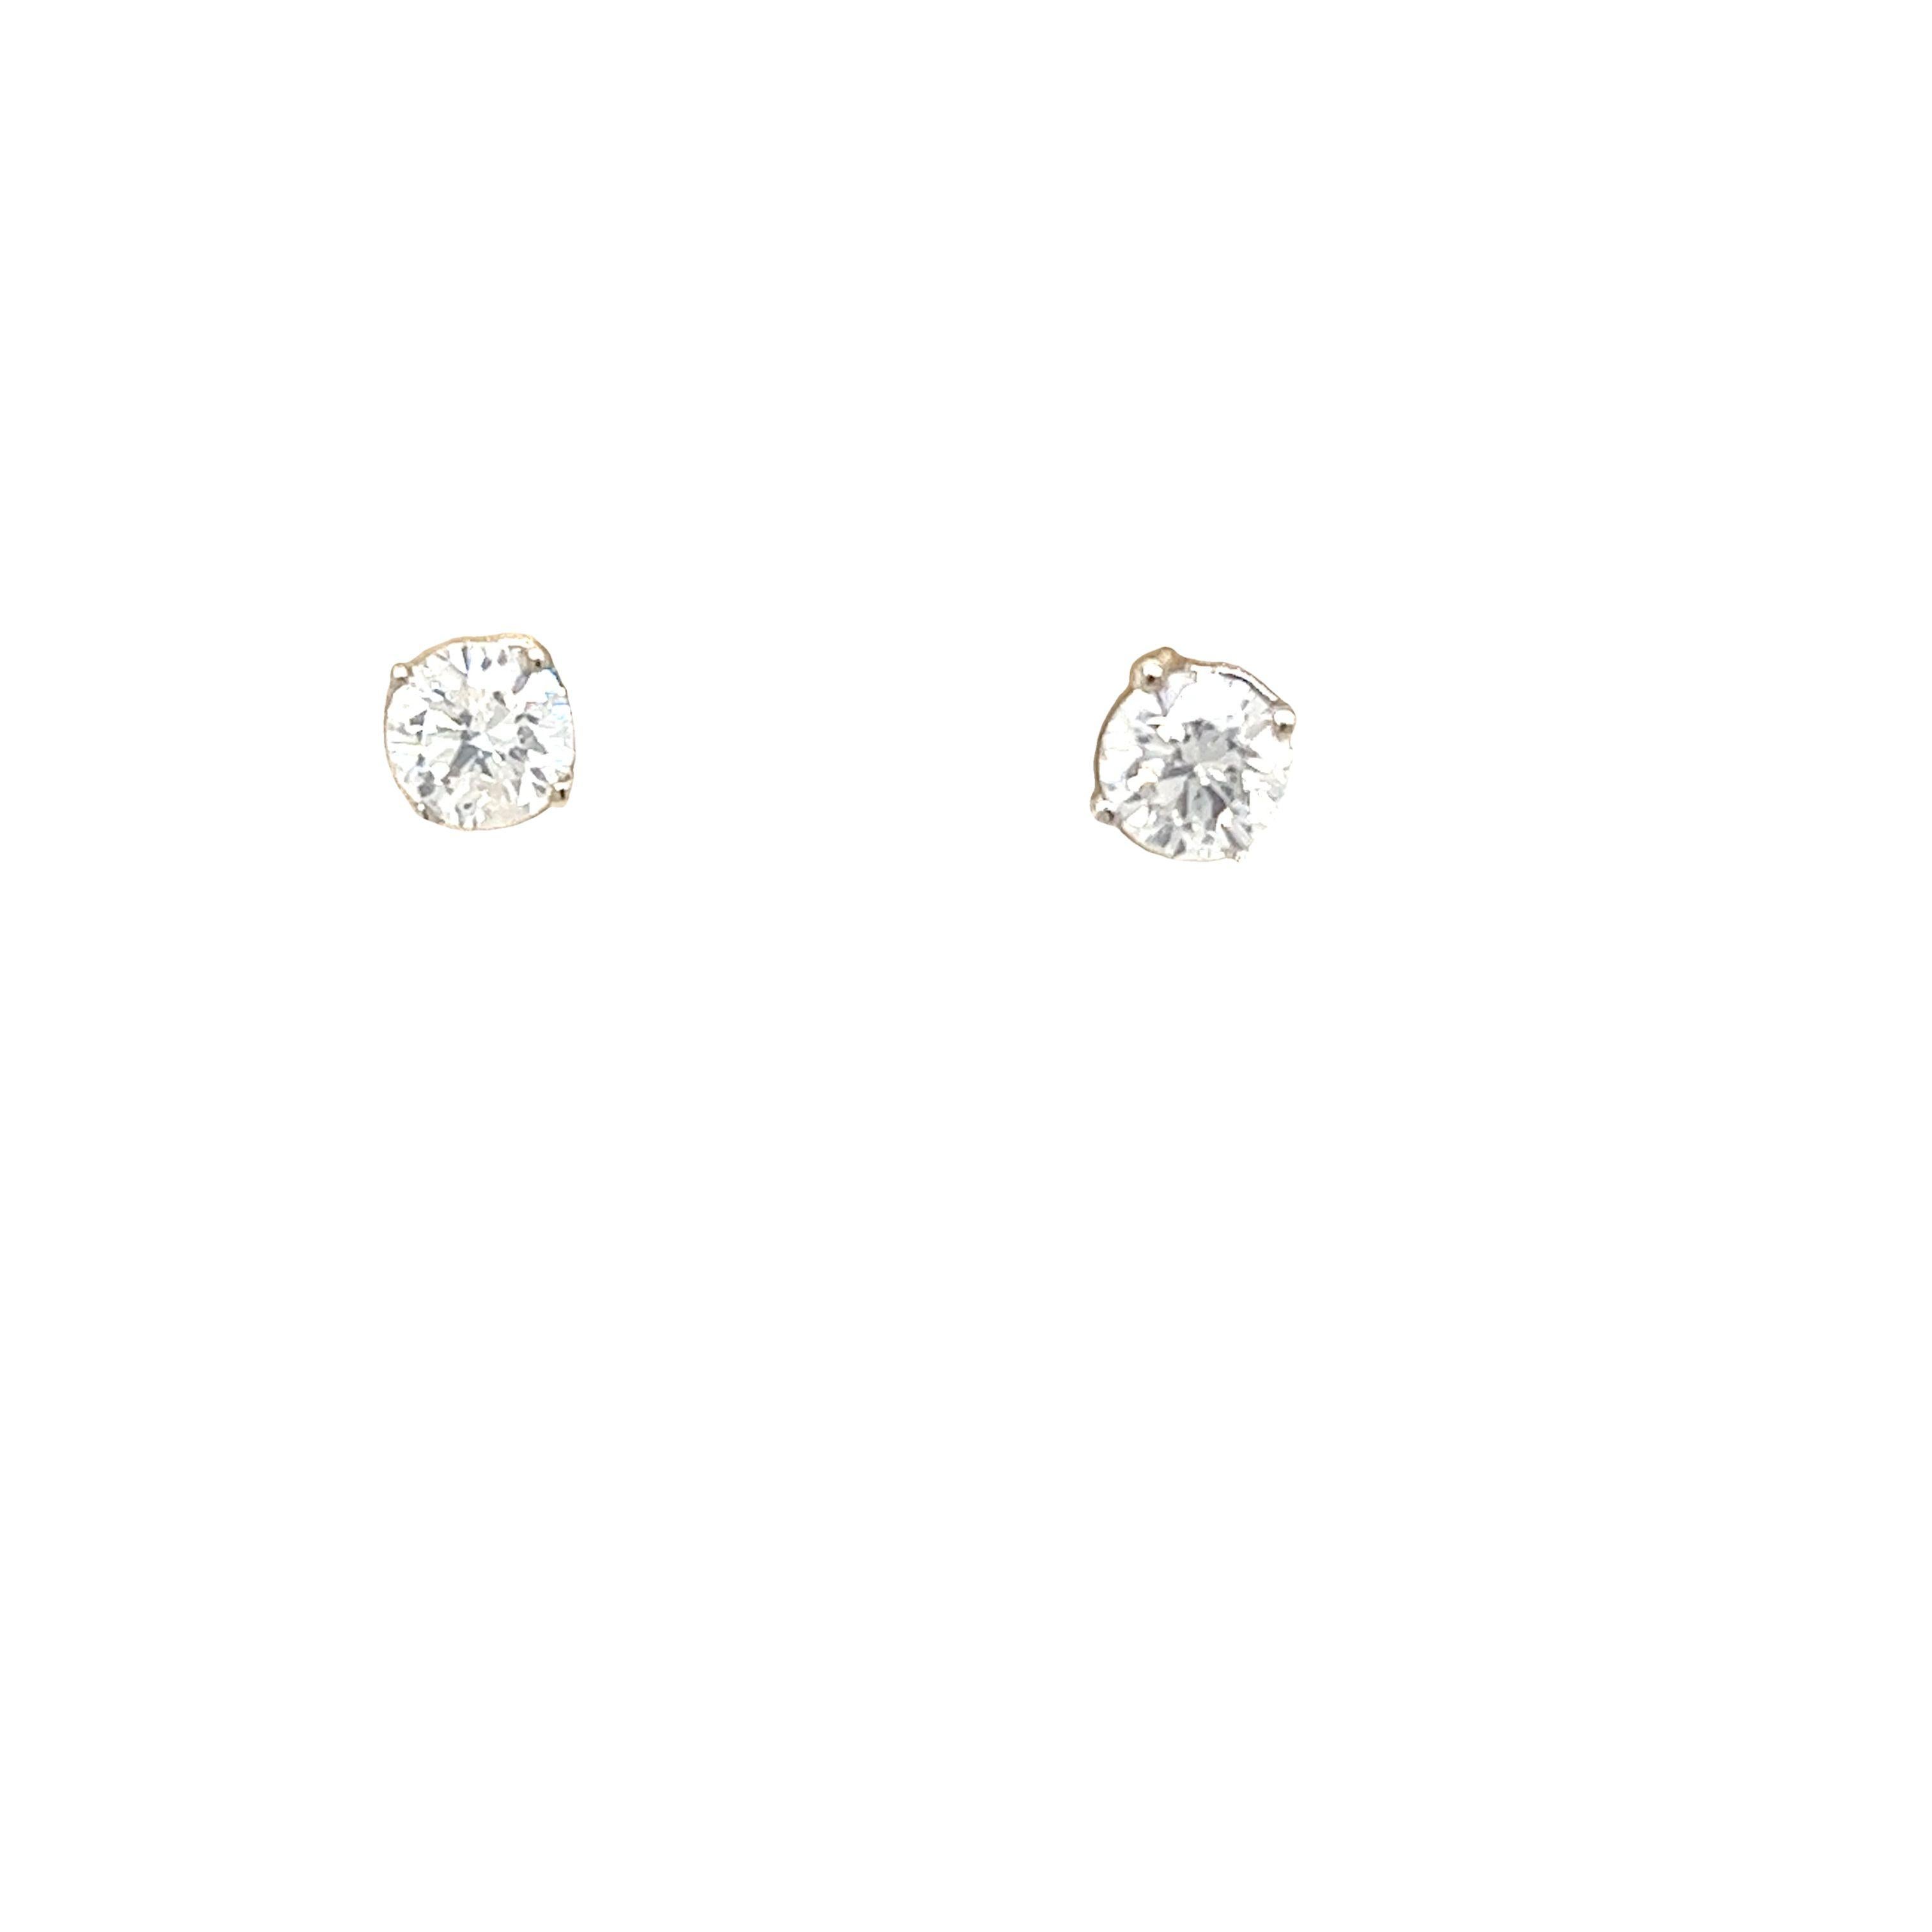 9ct Yellow & White Gold Diamond Stud Earrings, 0.65ct Total Diamond Weight For Sale 3